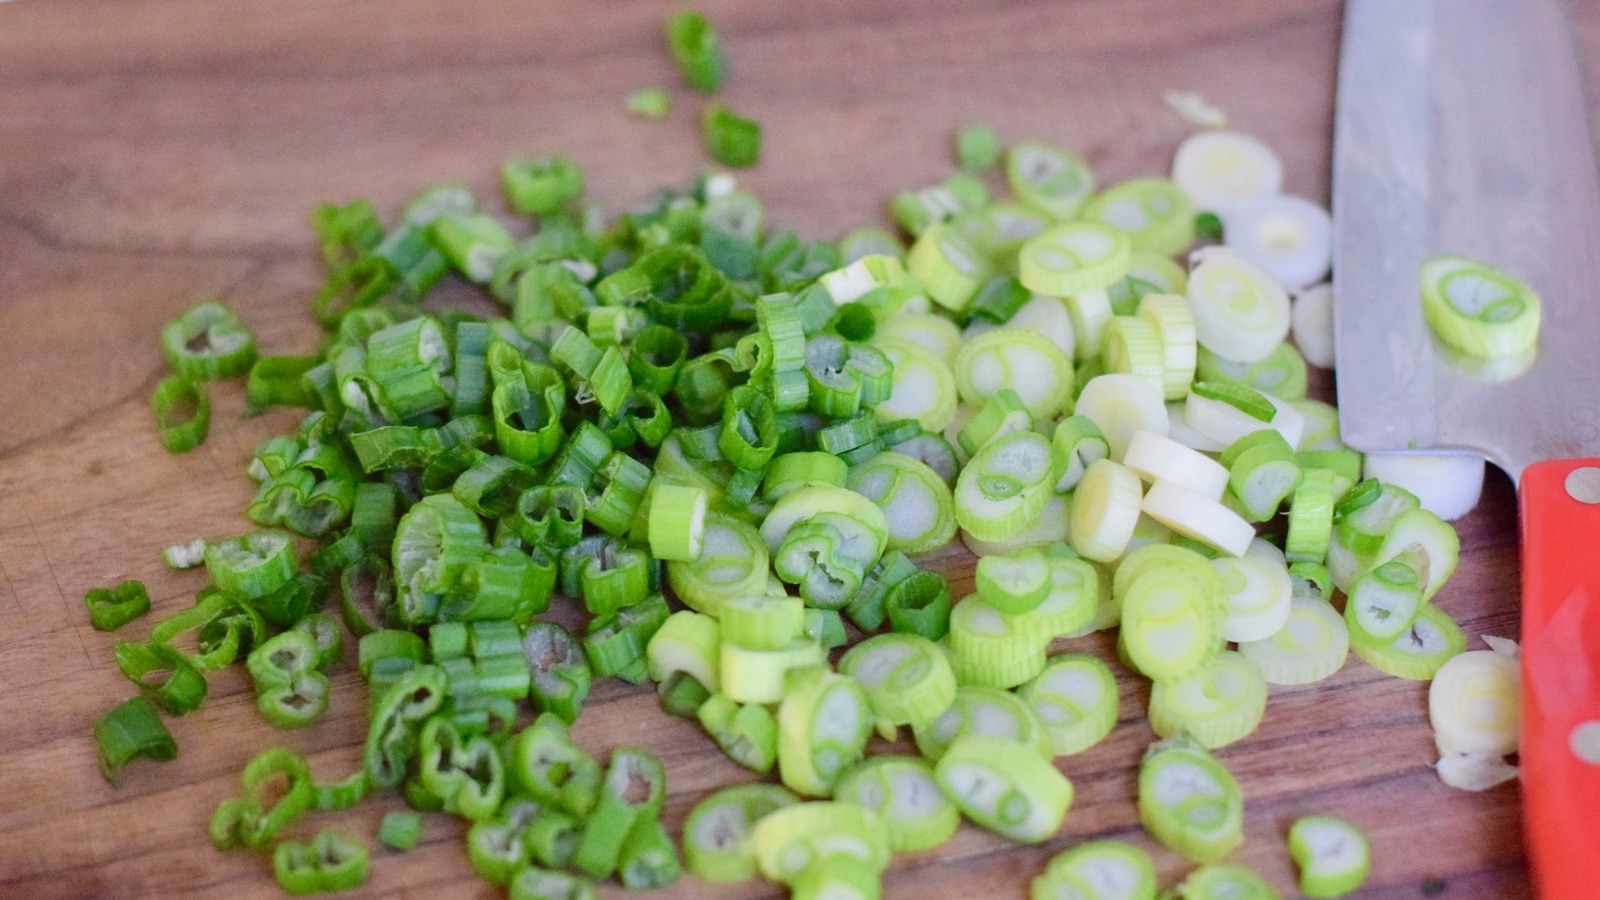 https://www.mashed.com/img/gallery/how-to-cut-green-onions/l-intro-1615997693.jpg